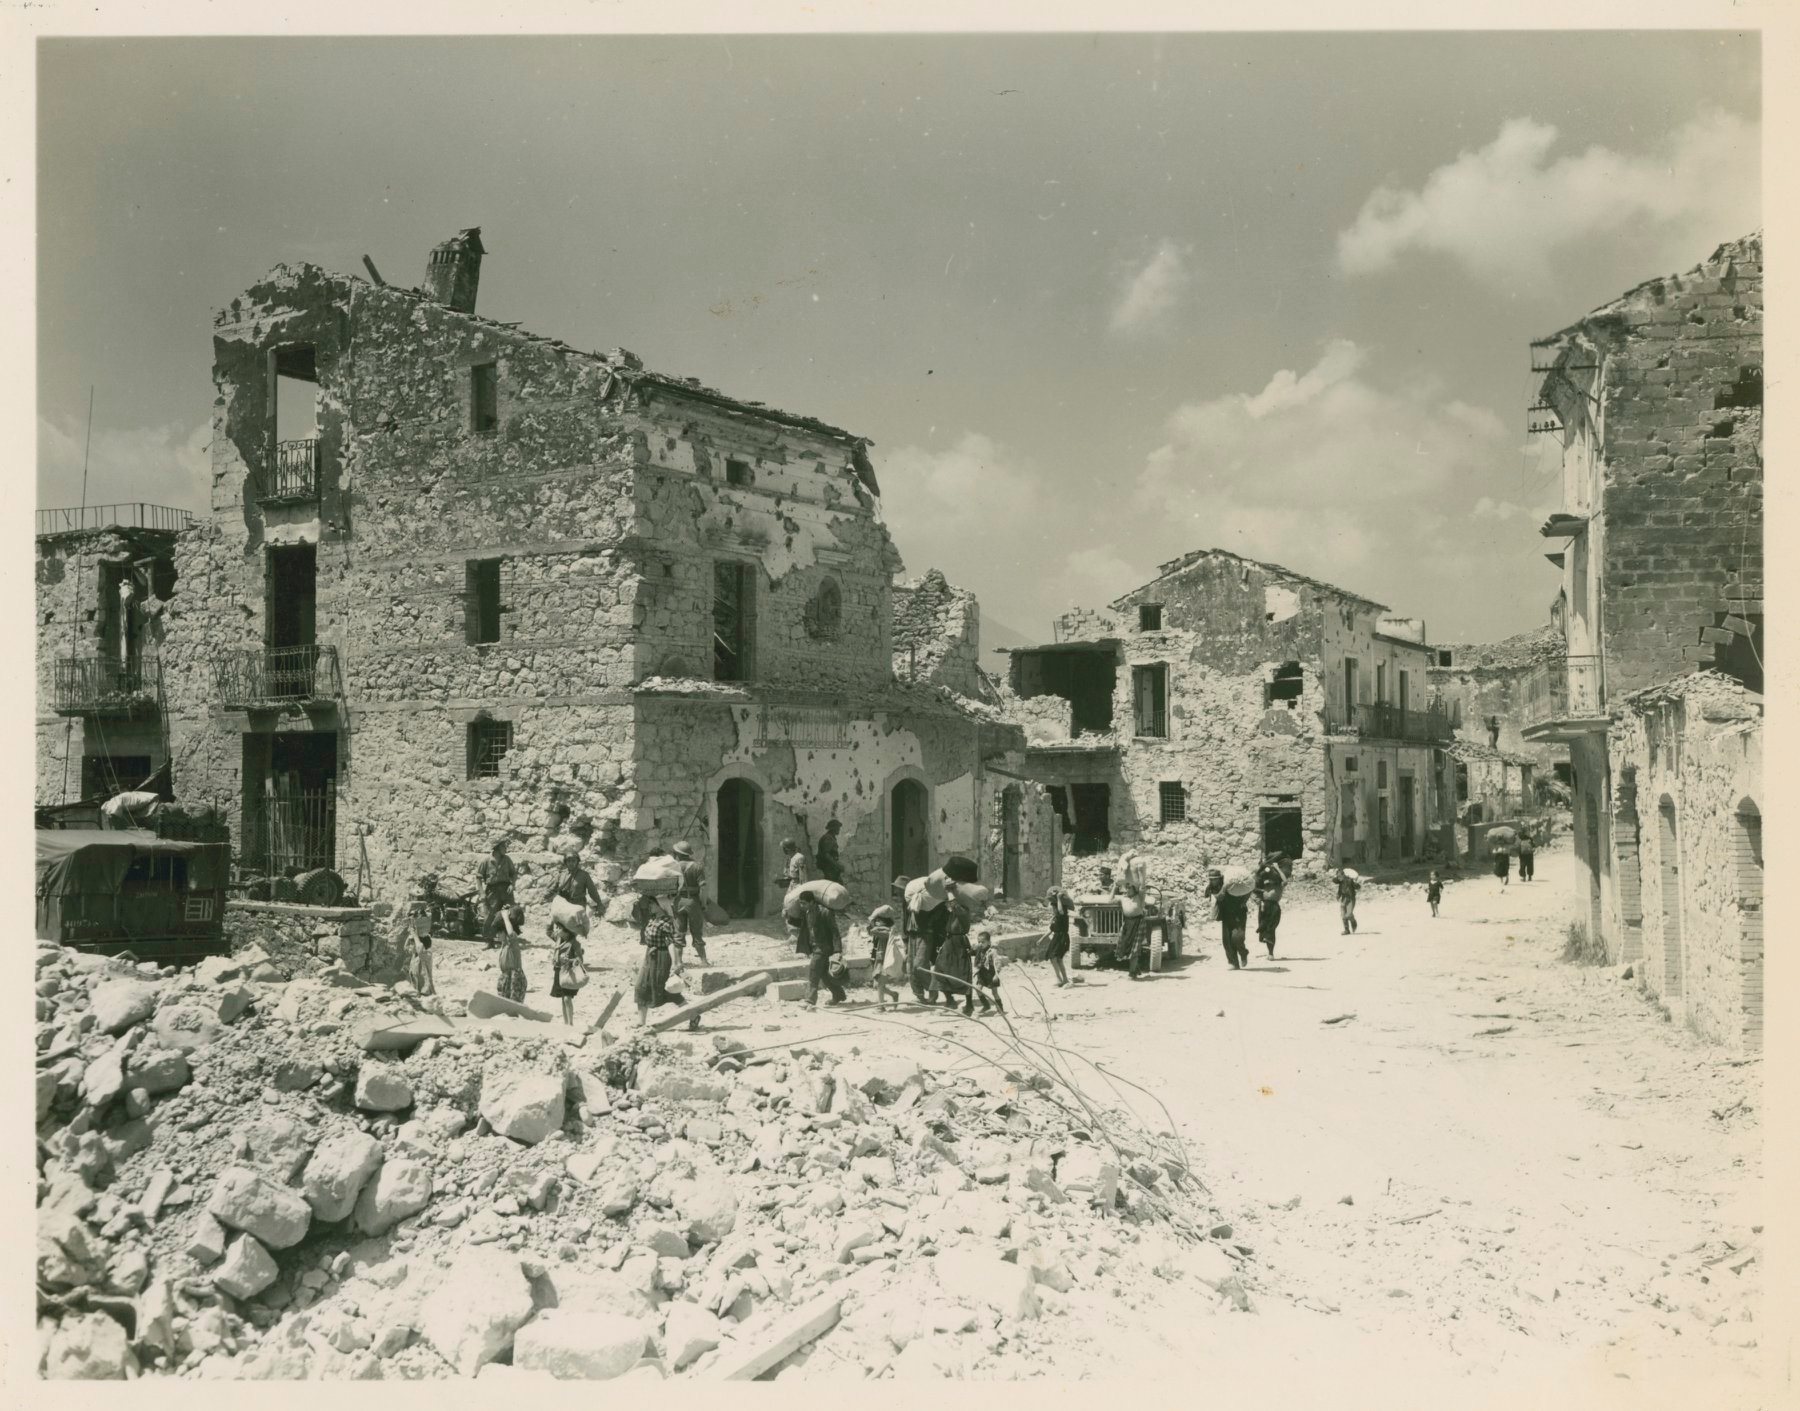 <p class='eng'>16 MAY 1944 – Fifth Army, St. Giorgio Area, Italy – 5-MM-44-5177 – Italian refugees making their way through St. Giorgio after the town fell to the 1st Motorized Infantry Division of the French Corps. (Photo by James A. Cuca, 163d Signal Photo Co.)</p>